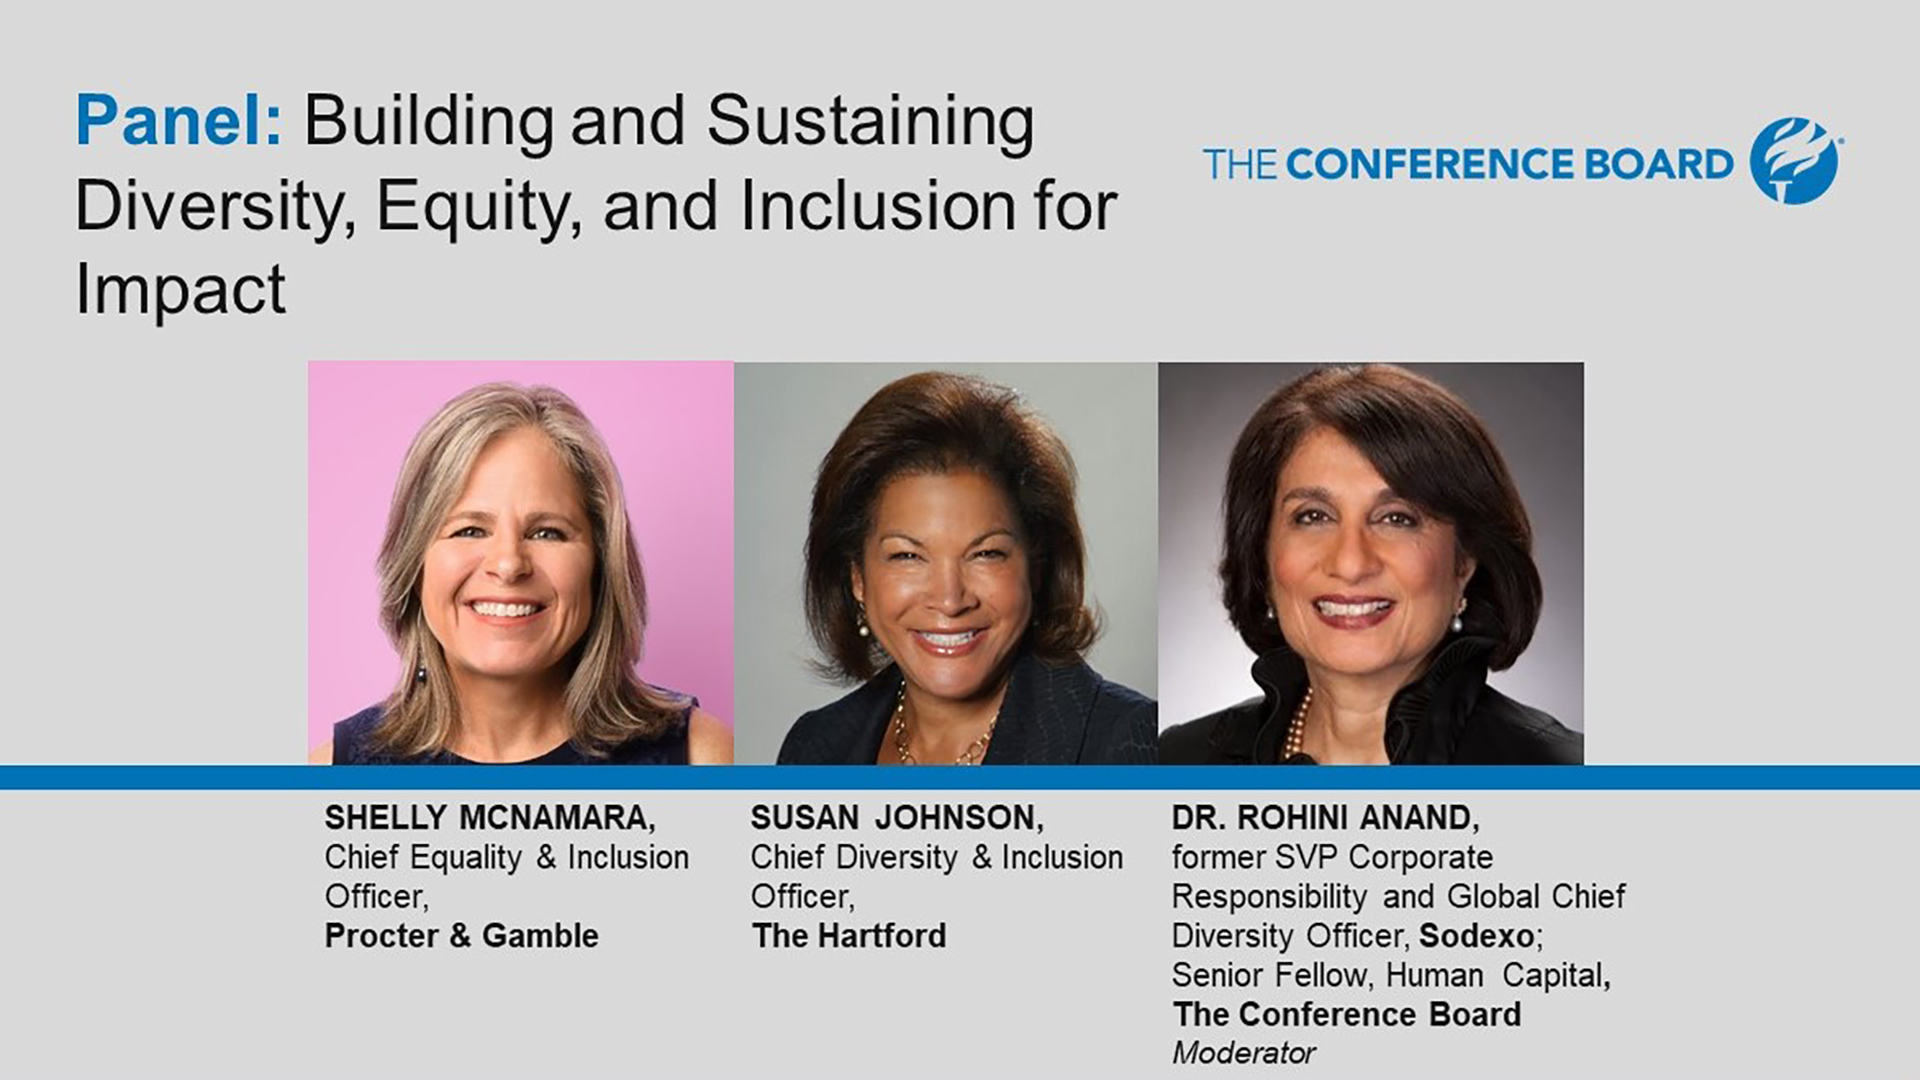 Building a More Civil & Just Society: Session N - Building and Sustaining Diversity, Equity, and Inclusion for Impact. 40 Mins